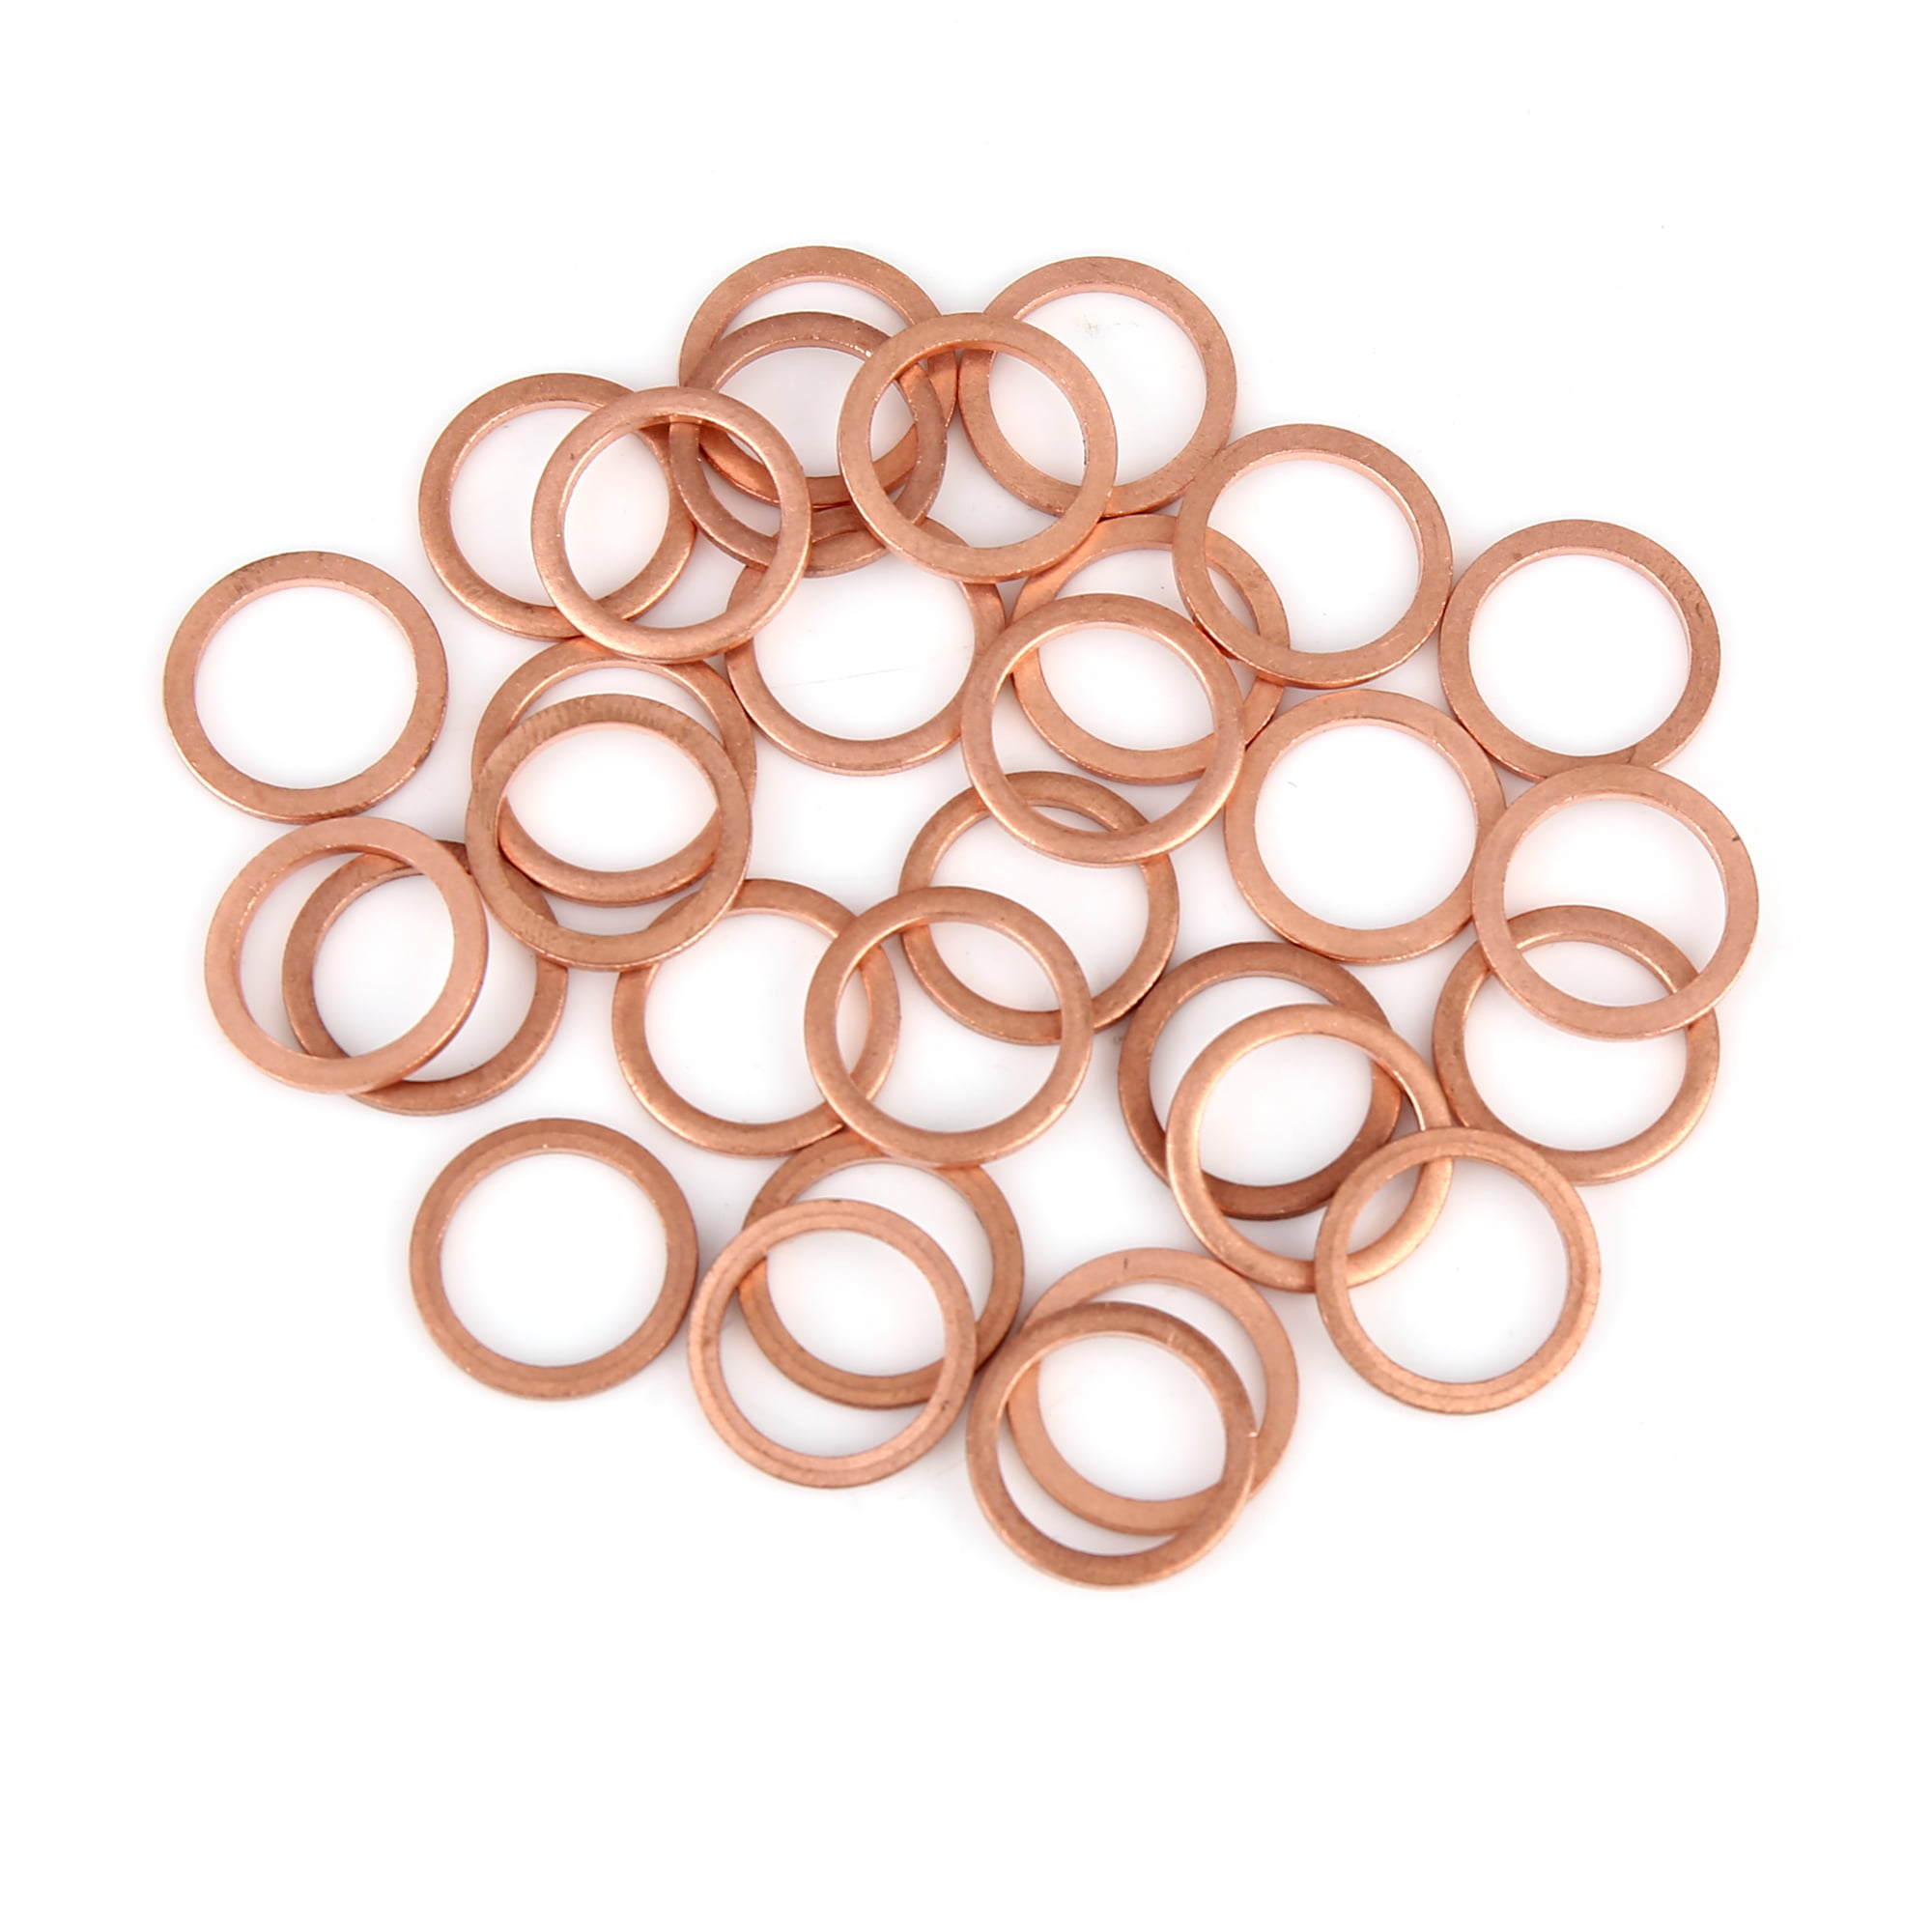 M16 Thick 1mm Metric Copper Flat Ring Oil Drain Plug Crush Washer Gaskets M12 